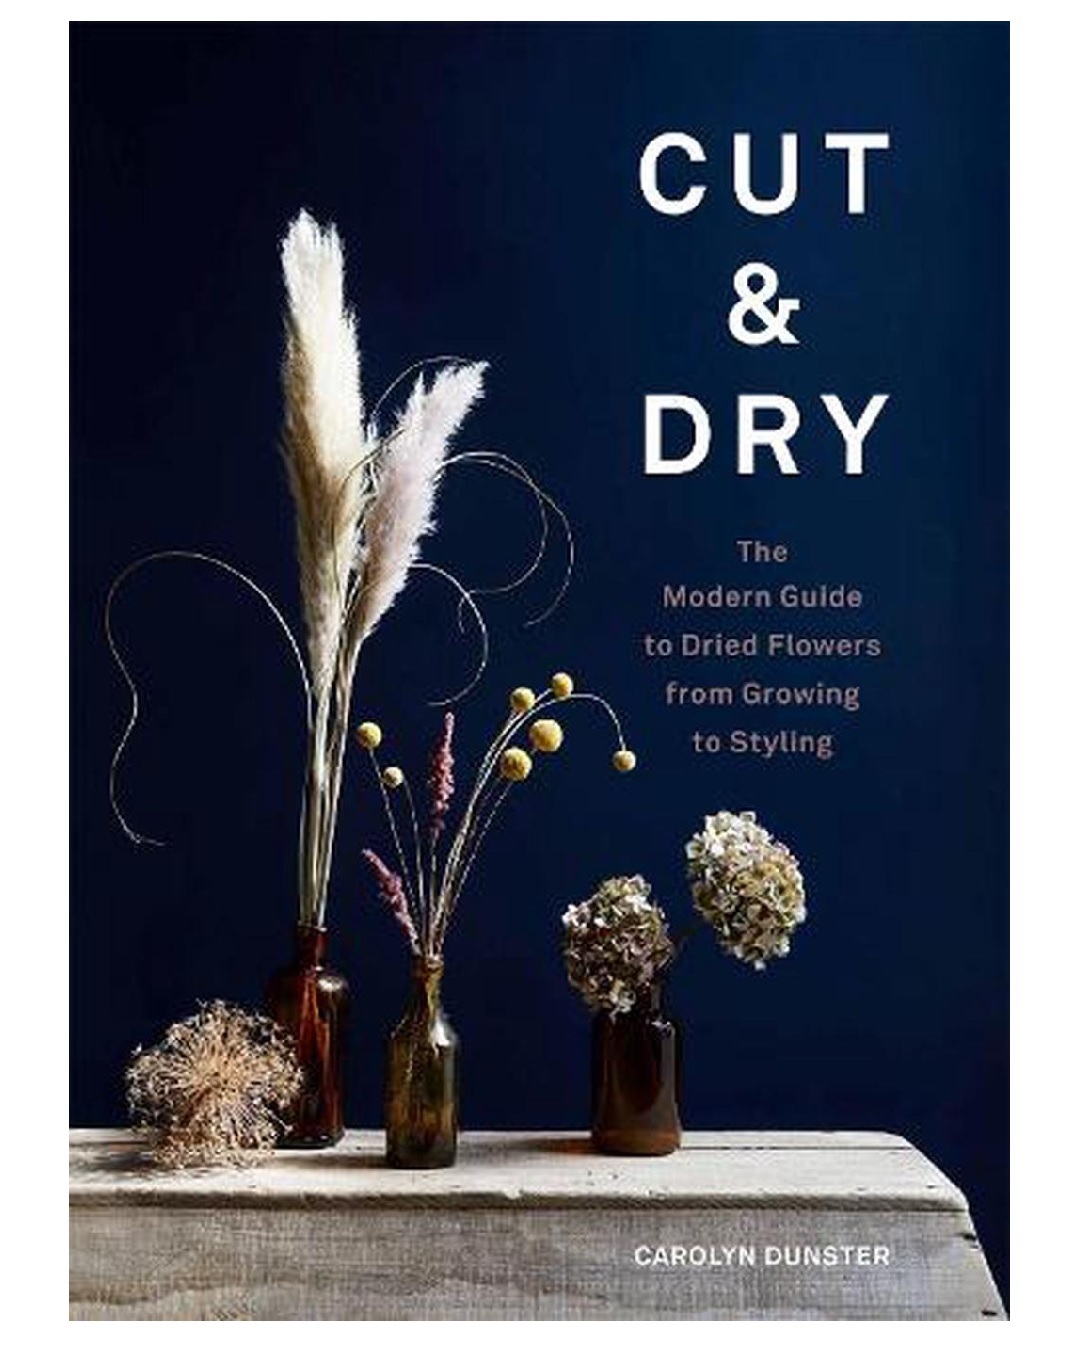 Cut and dry hardcover book